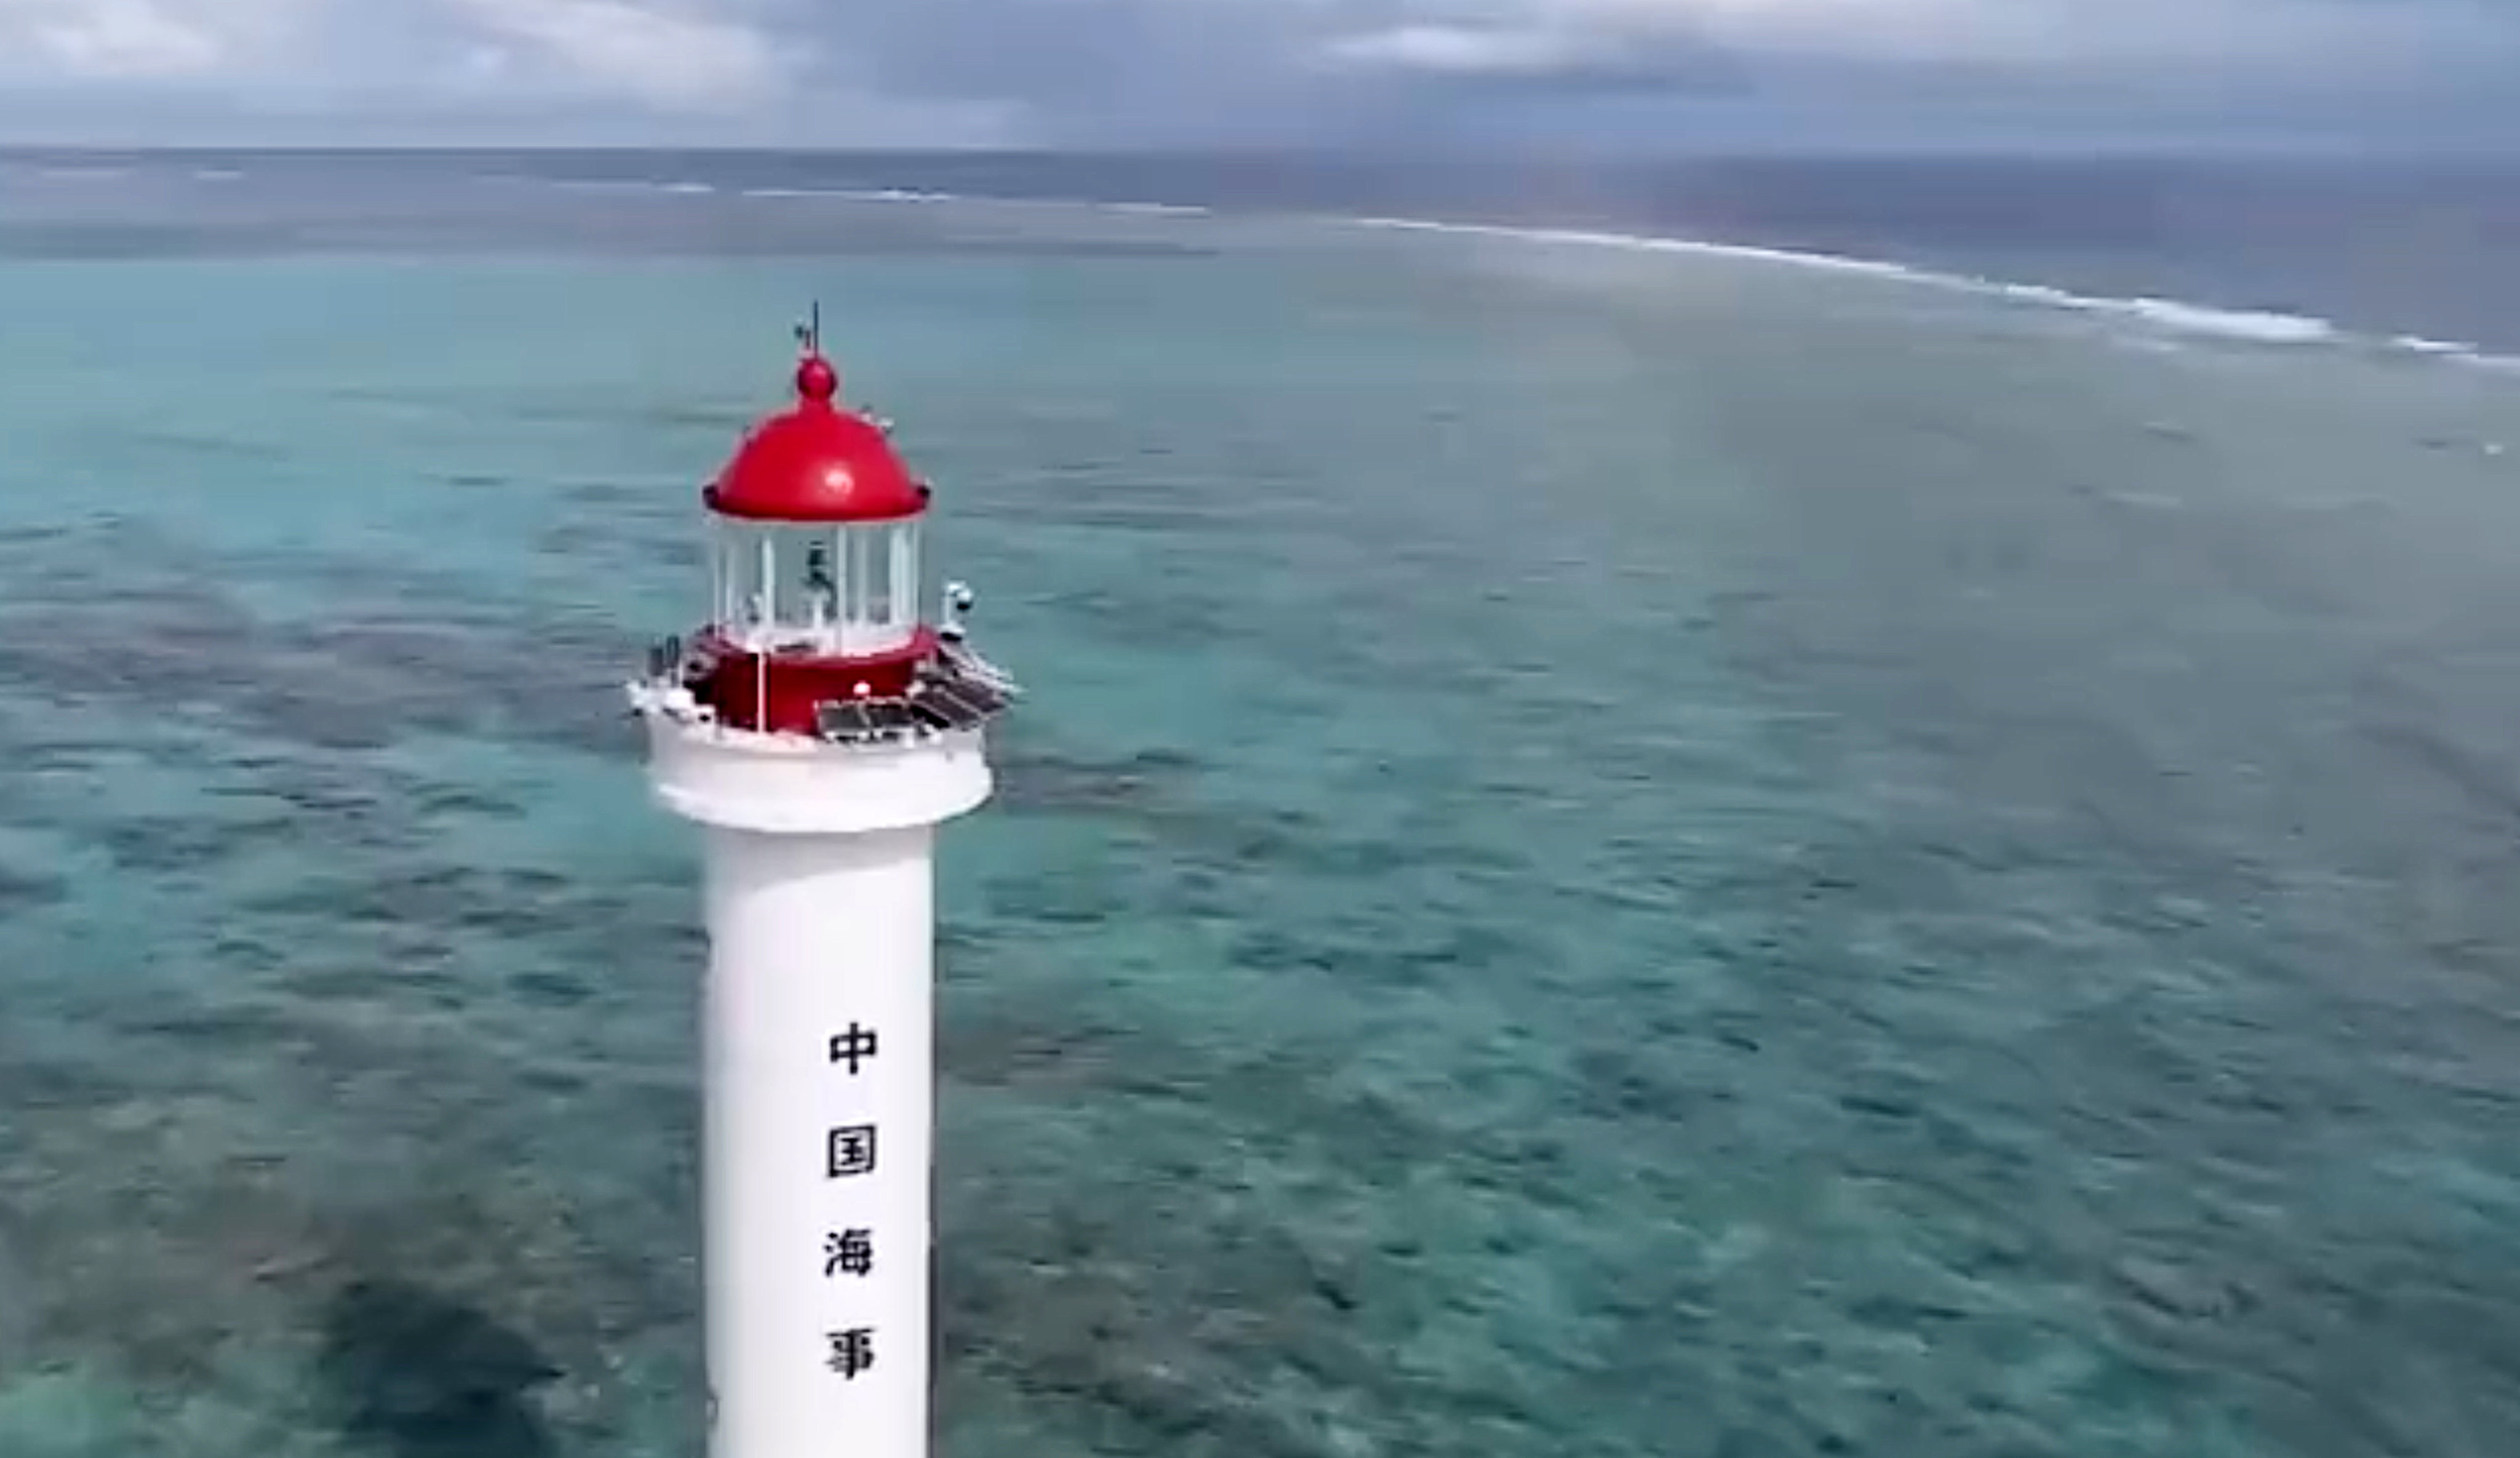 The ground stations have been installed at lighthouses on North Reef and Bombay Reef in the Paracel Islands. Photo: CCTV